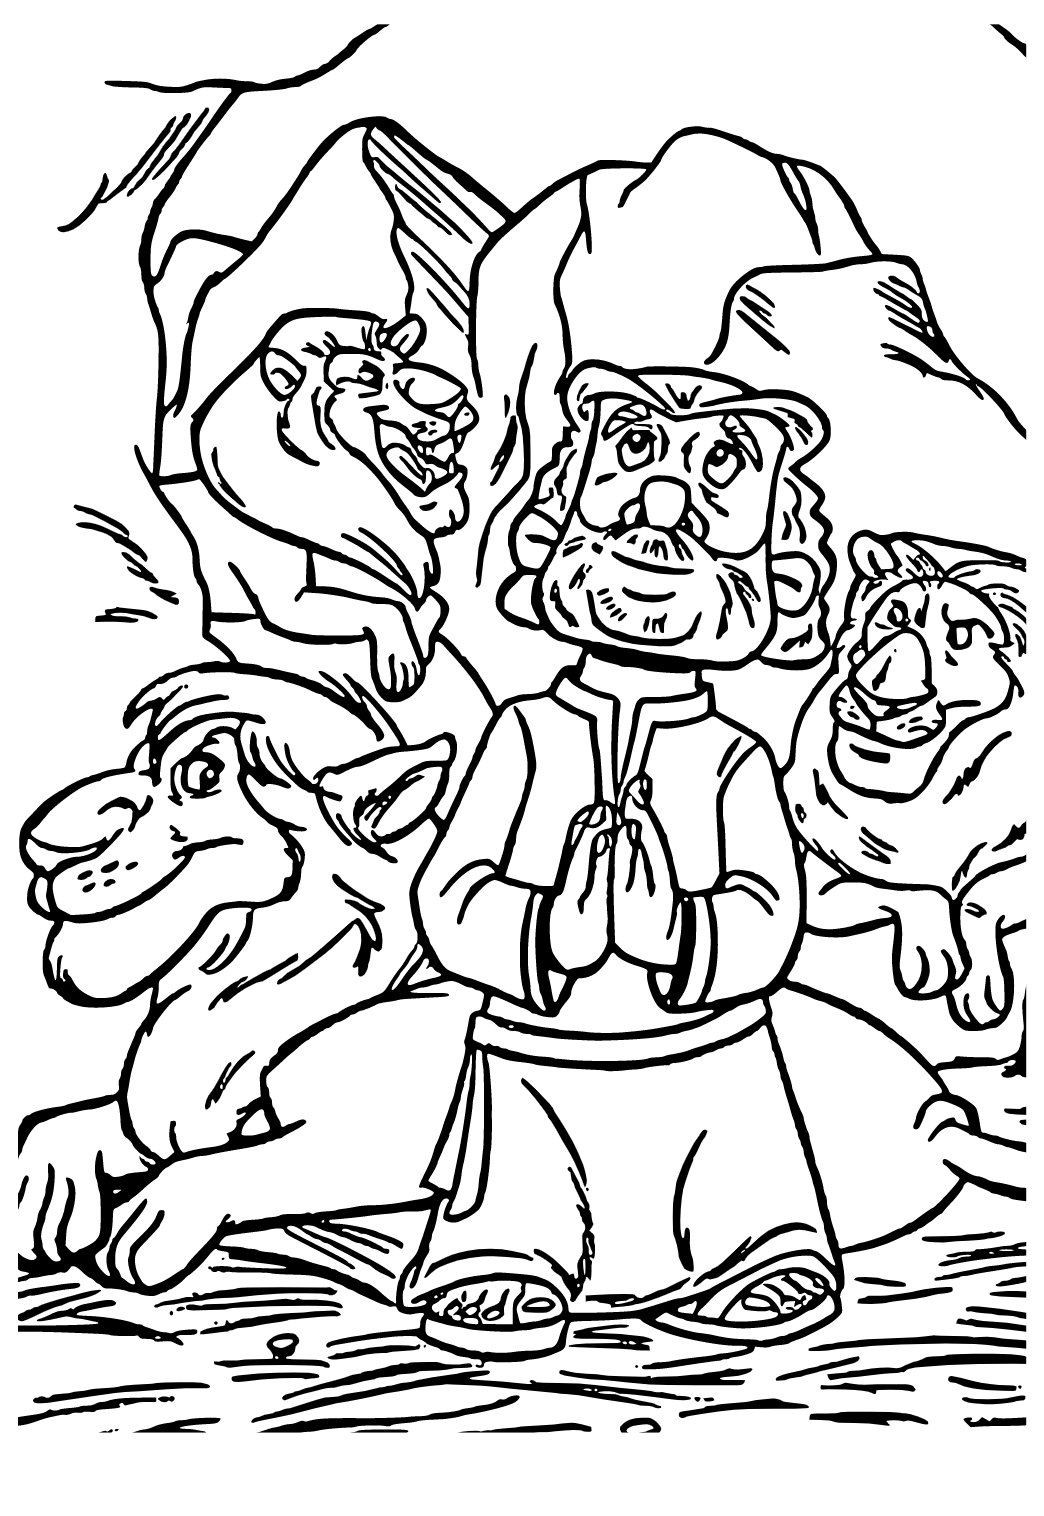 bible coloring pages lions